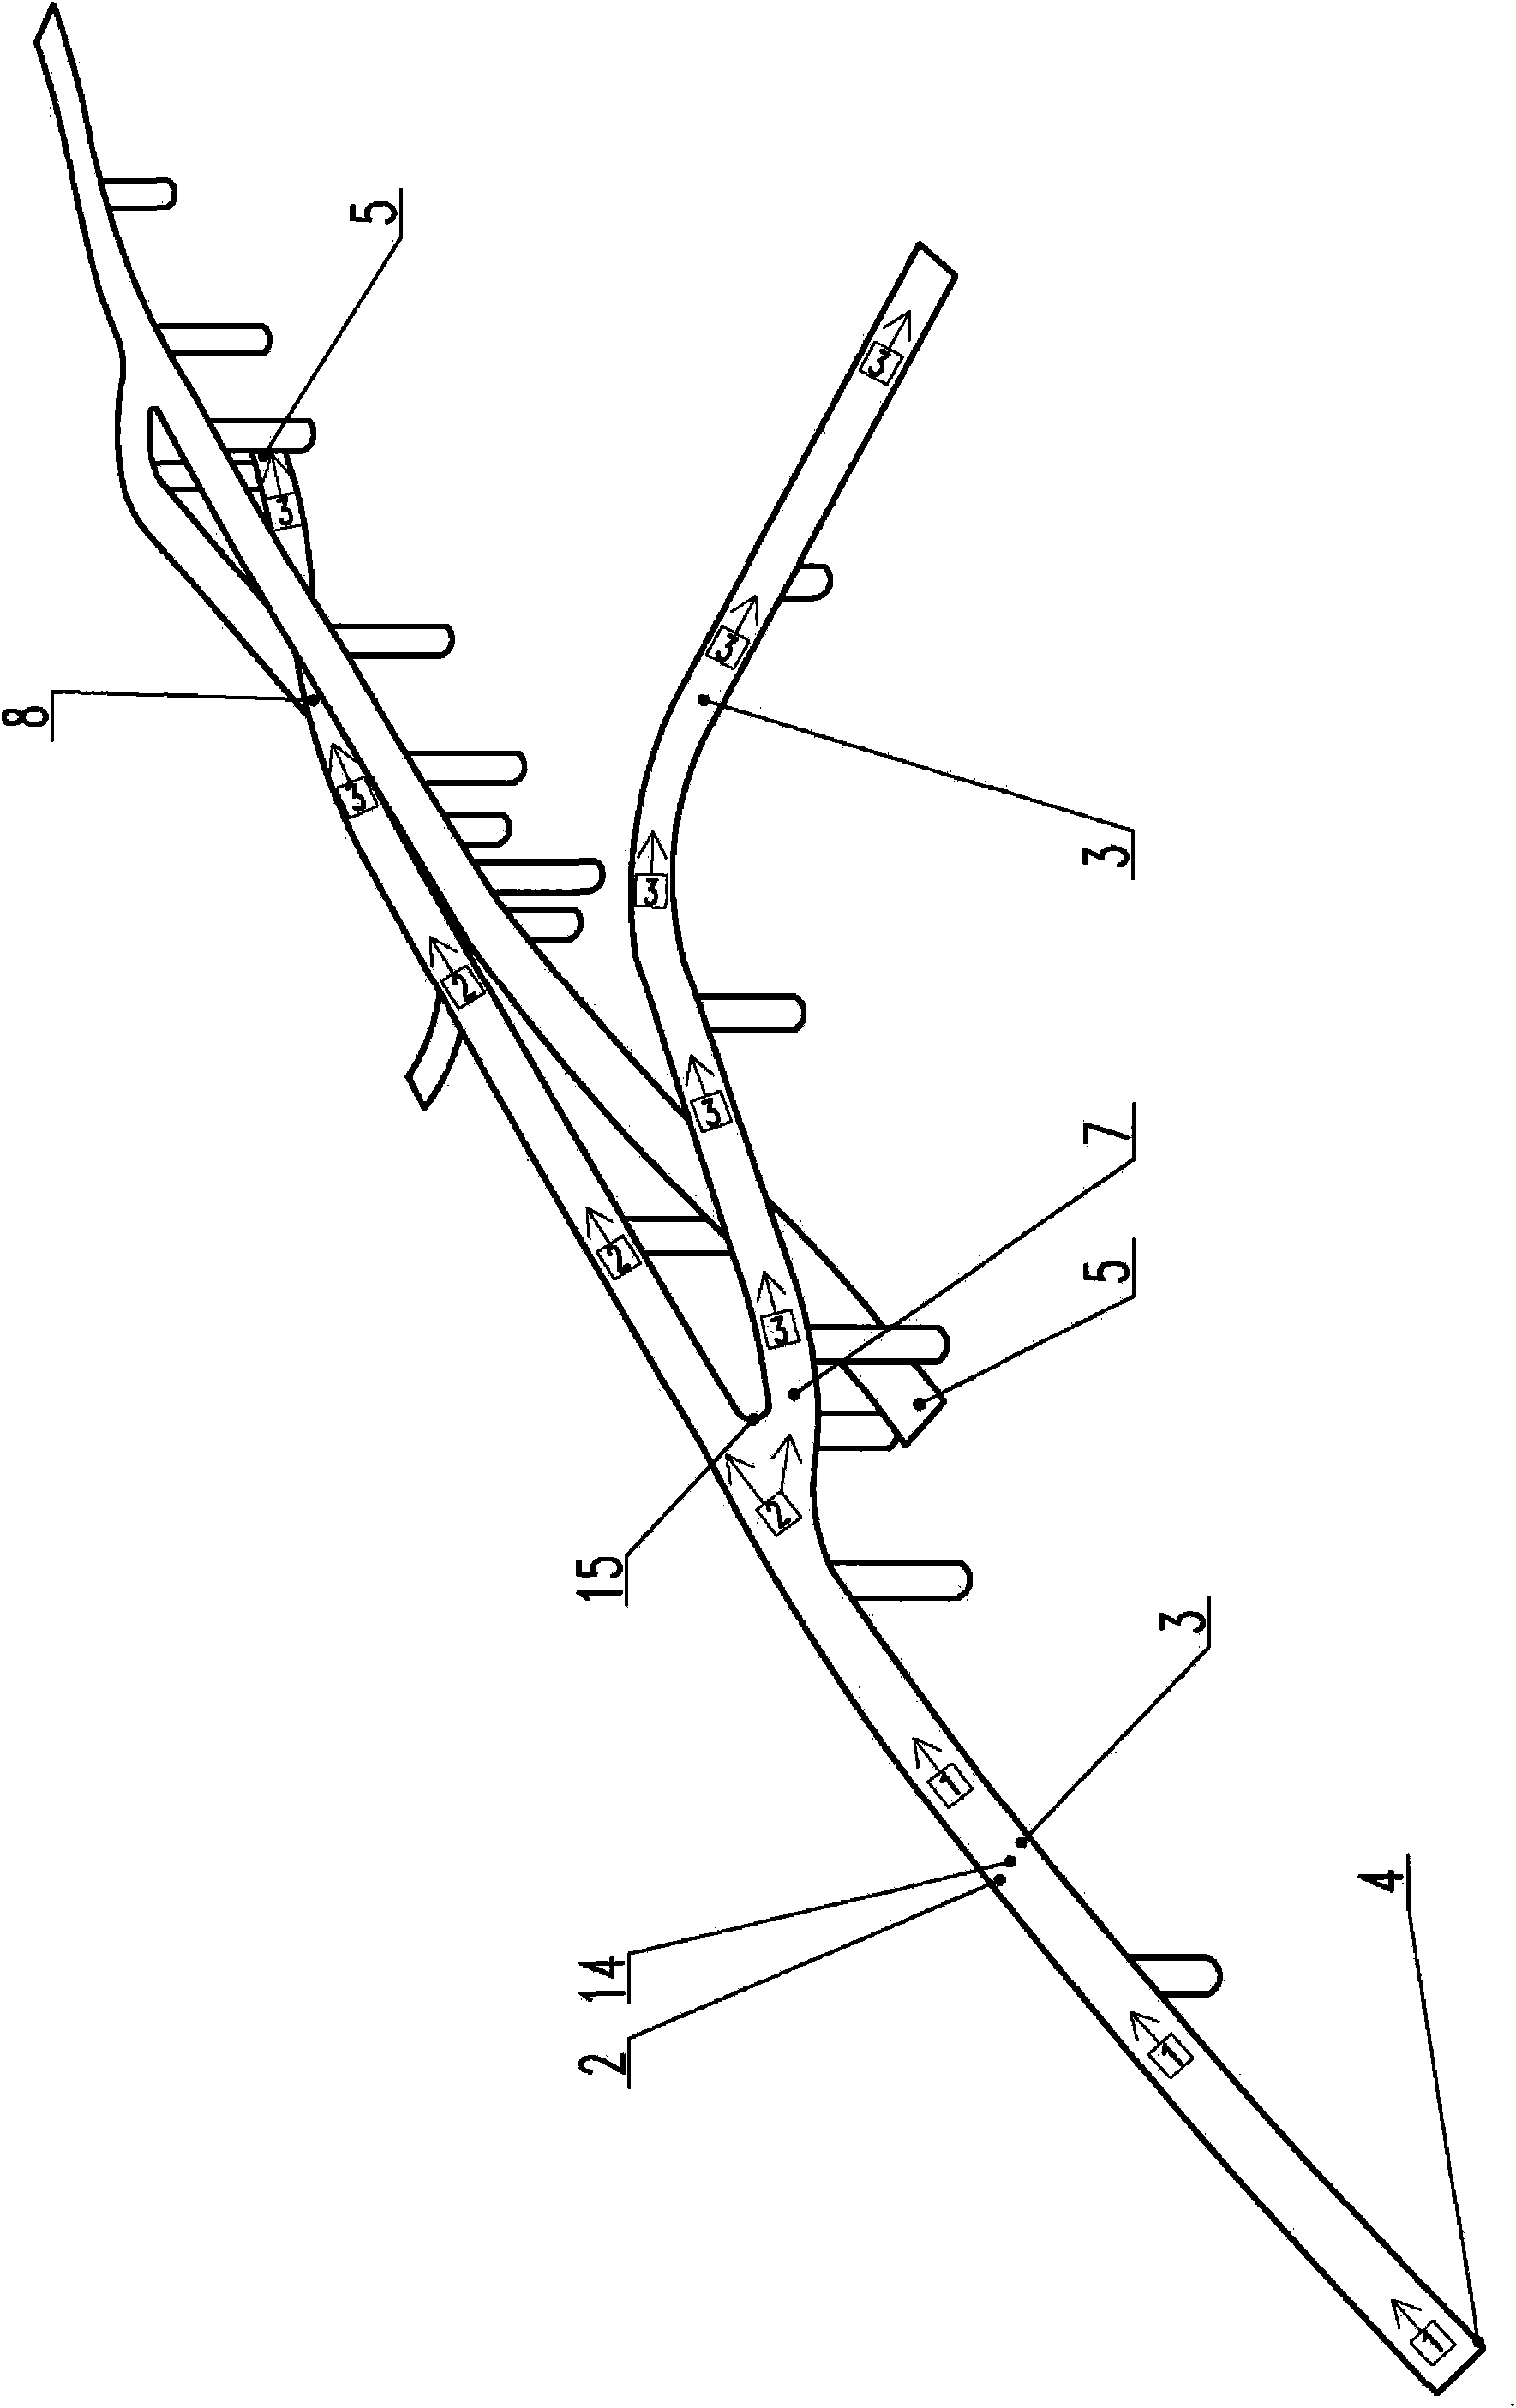 Combination bridge of two right-turn and straight-going "y"-shaped bifurcated bridges